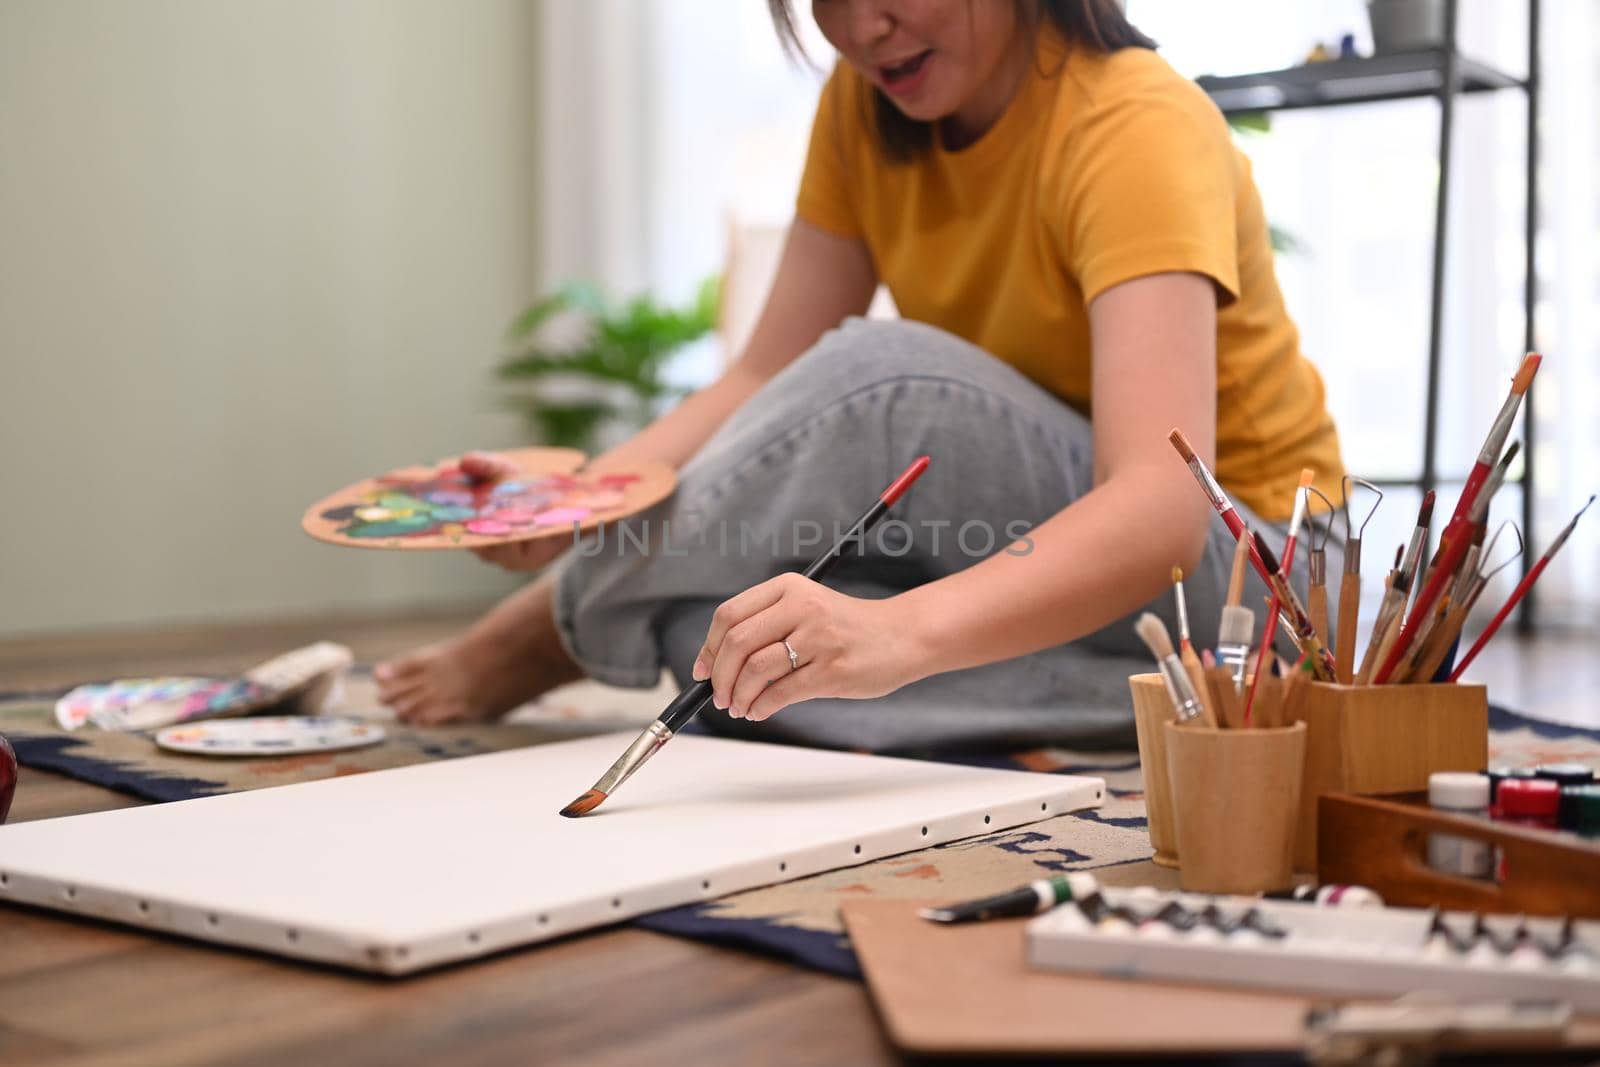 Casual young woman painting art picture with watercolor on canvas, enjoy creativity activity at home. Art, hobby and leisure activity concept.